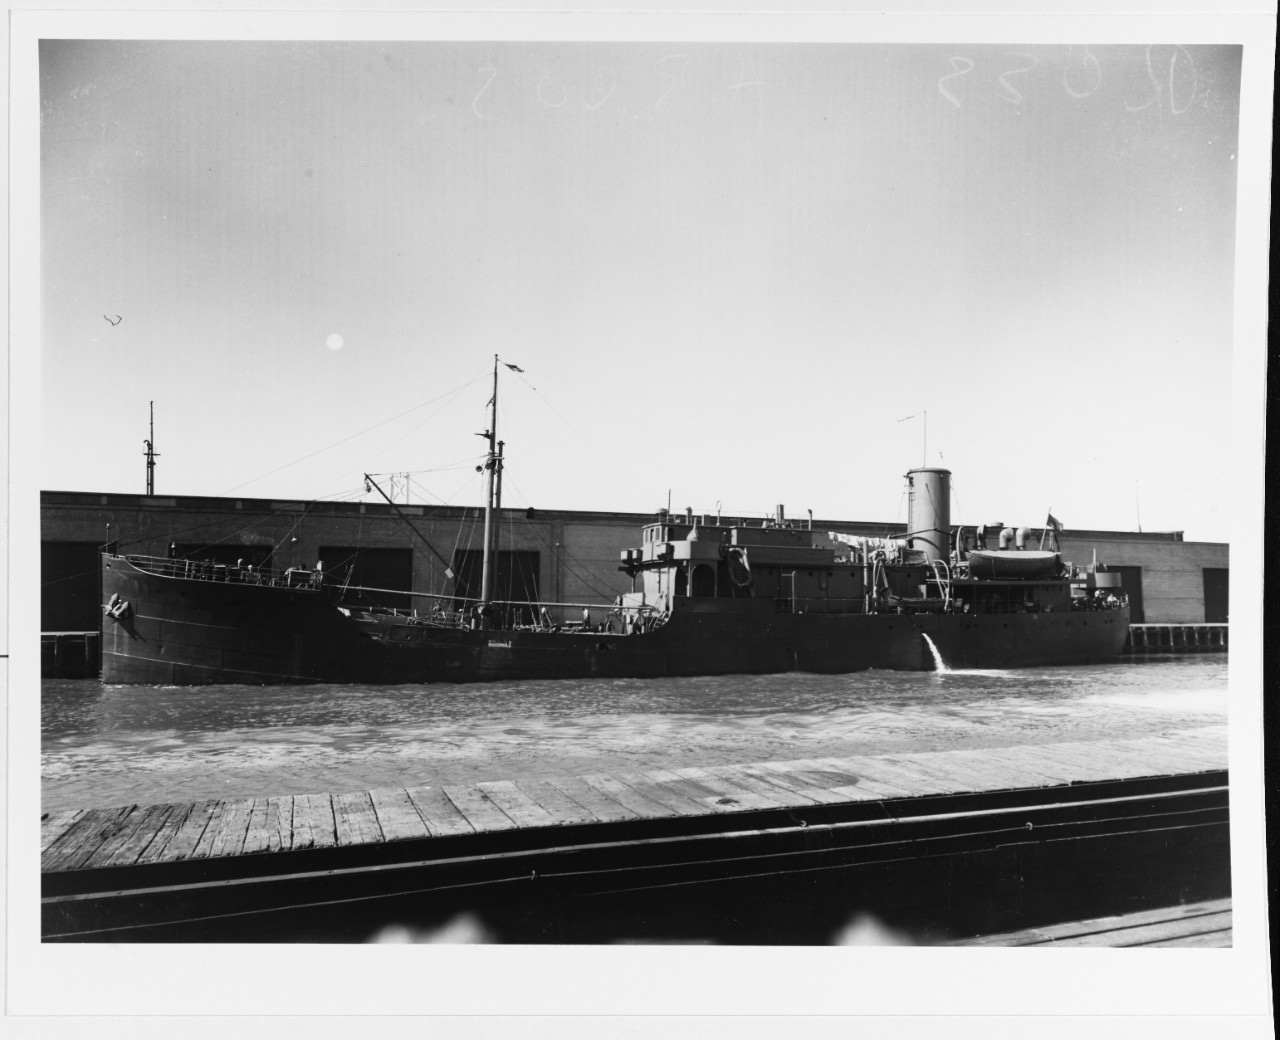 S.S. ARCOS (U.S.S.R. Merchant Freighter, 1918-1955?, Under this name 1922-1955?)                      